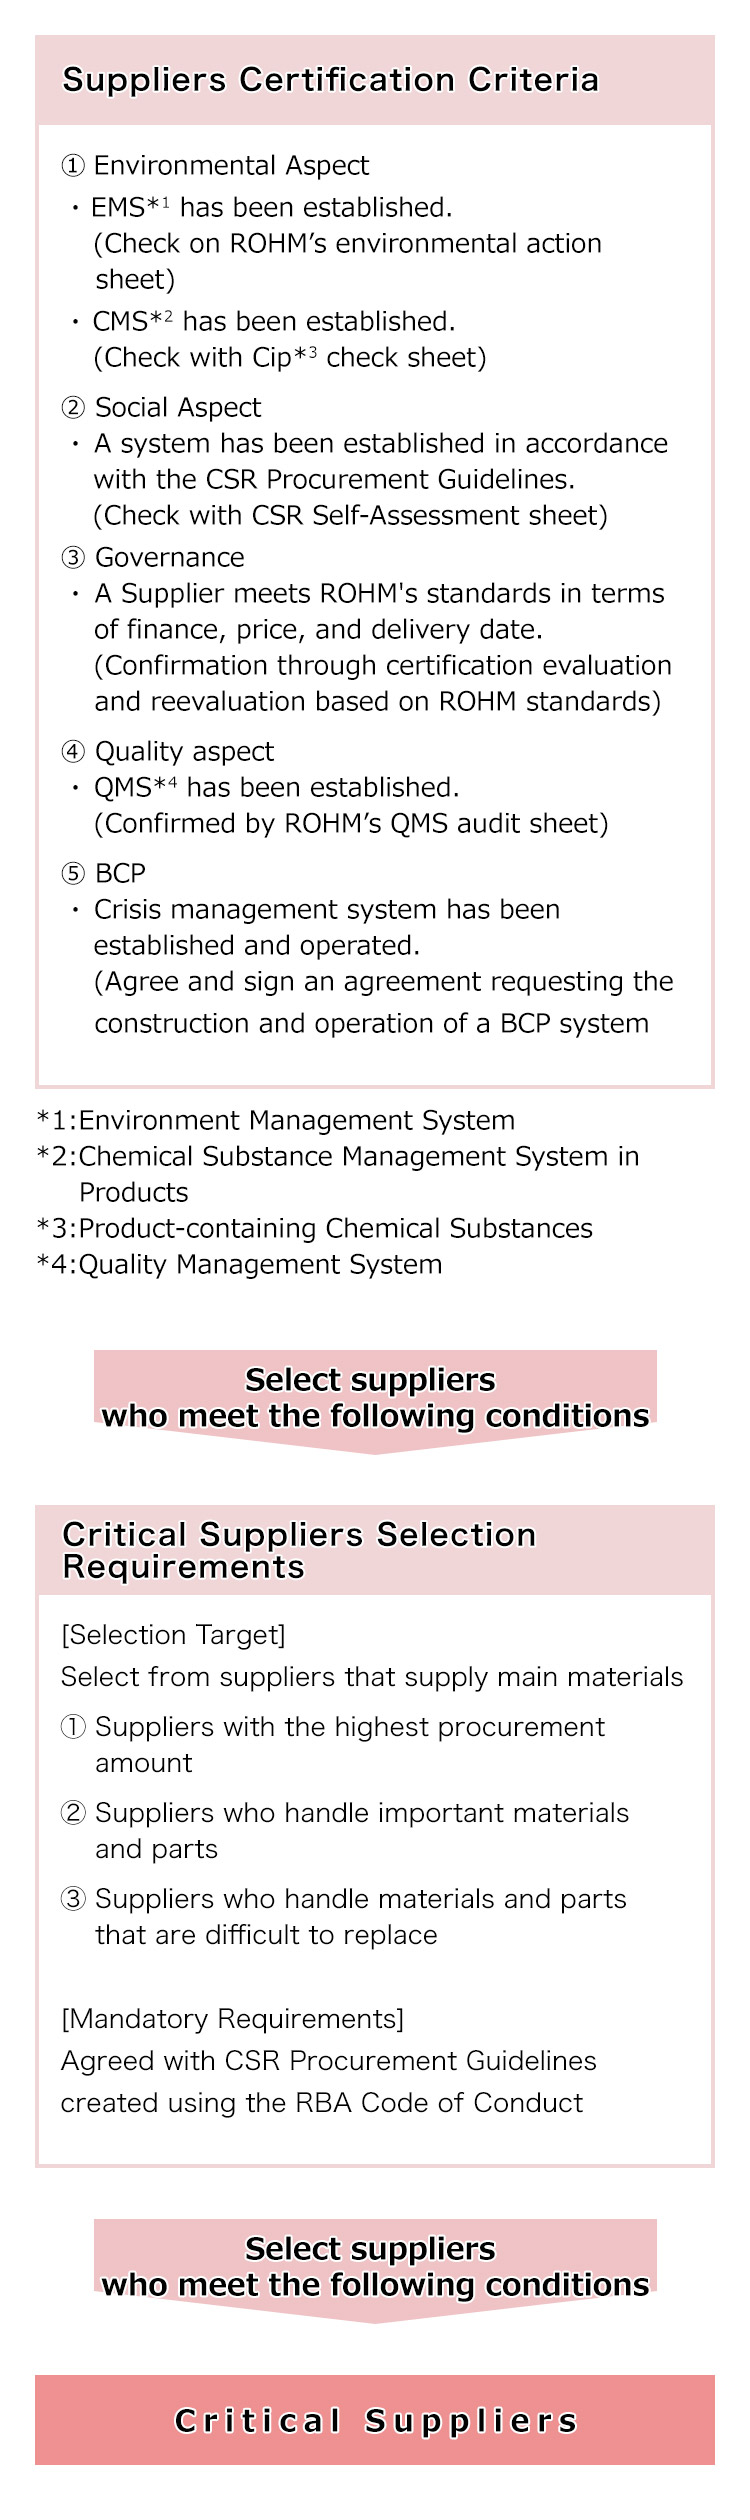 Flow of Selection of Critical Suppliers